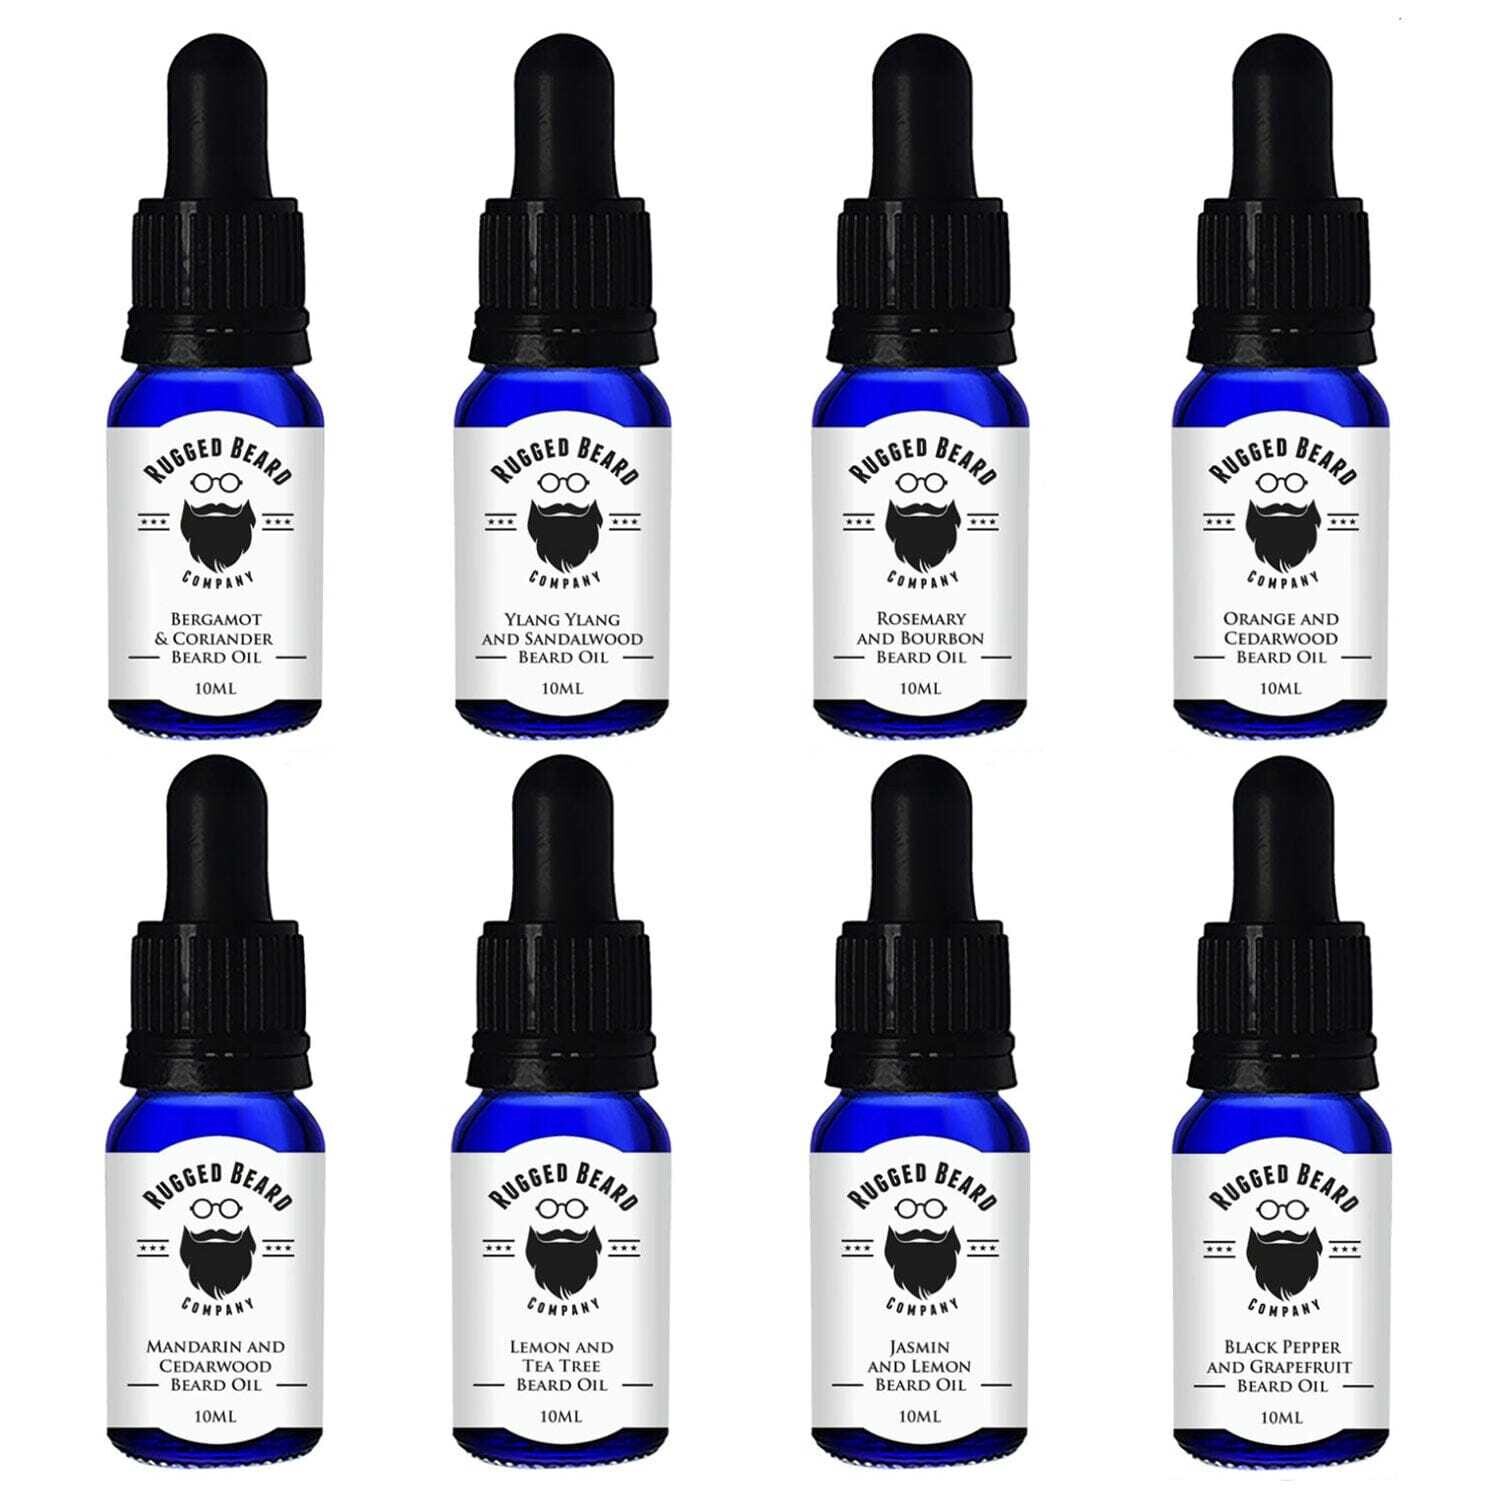 The Beard Oil Collection